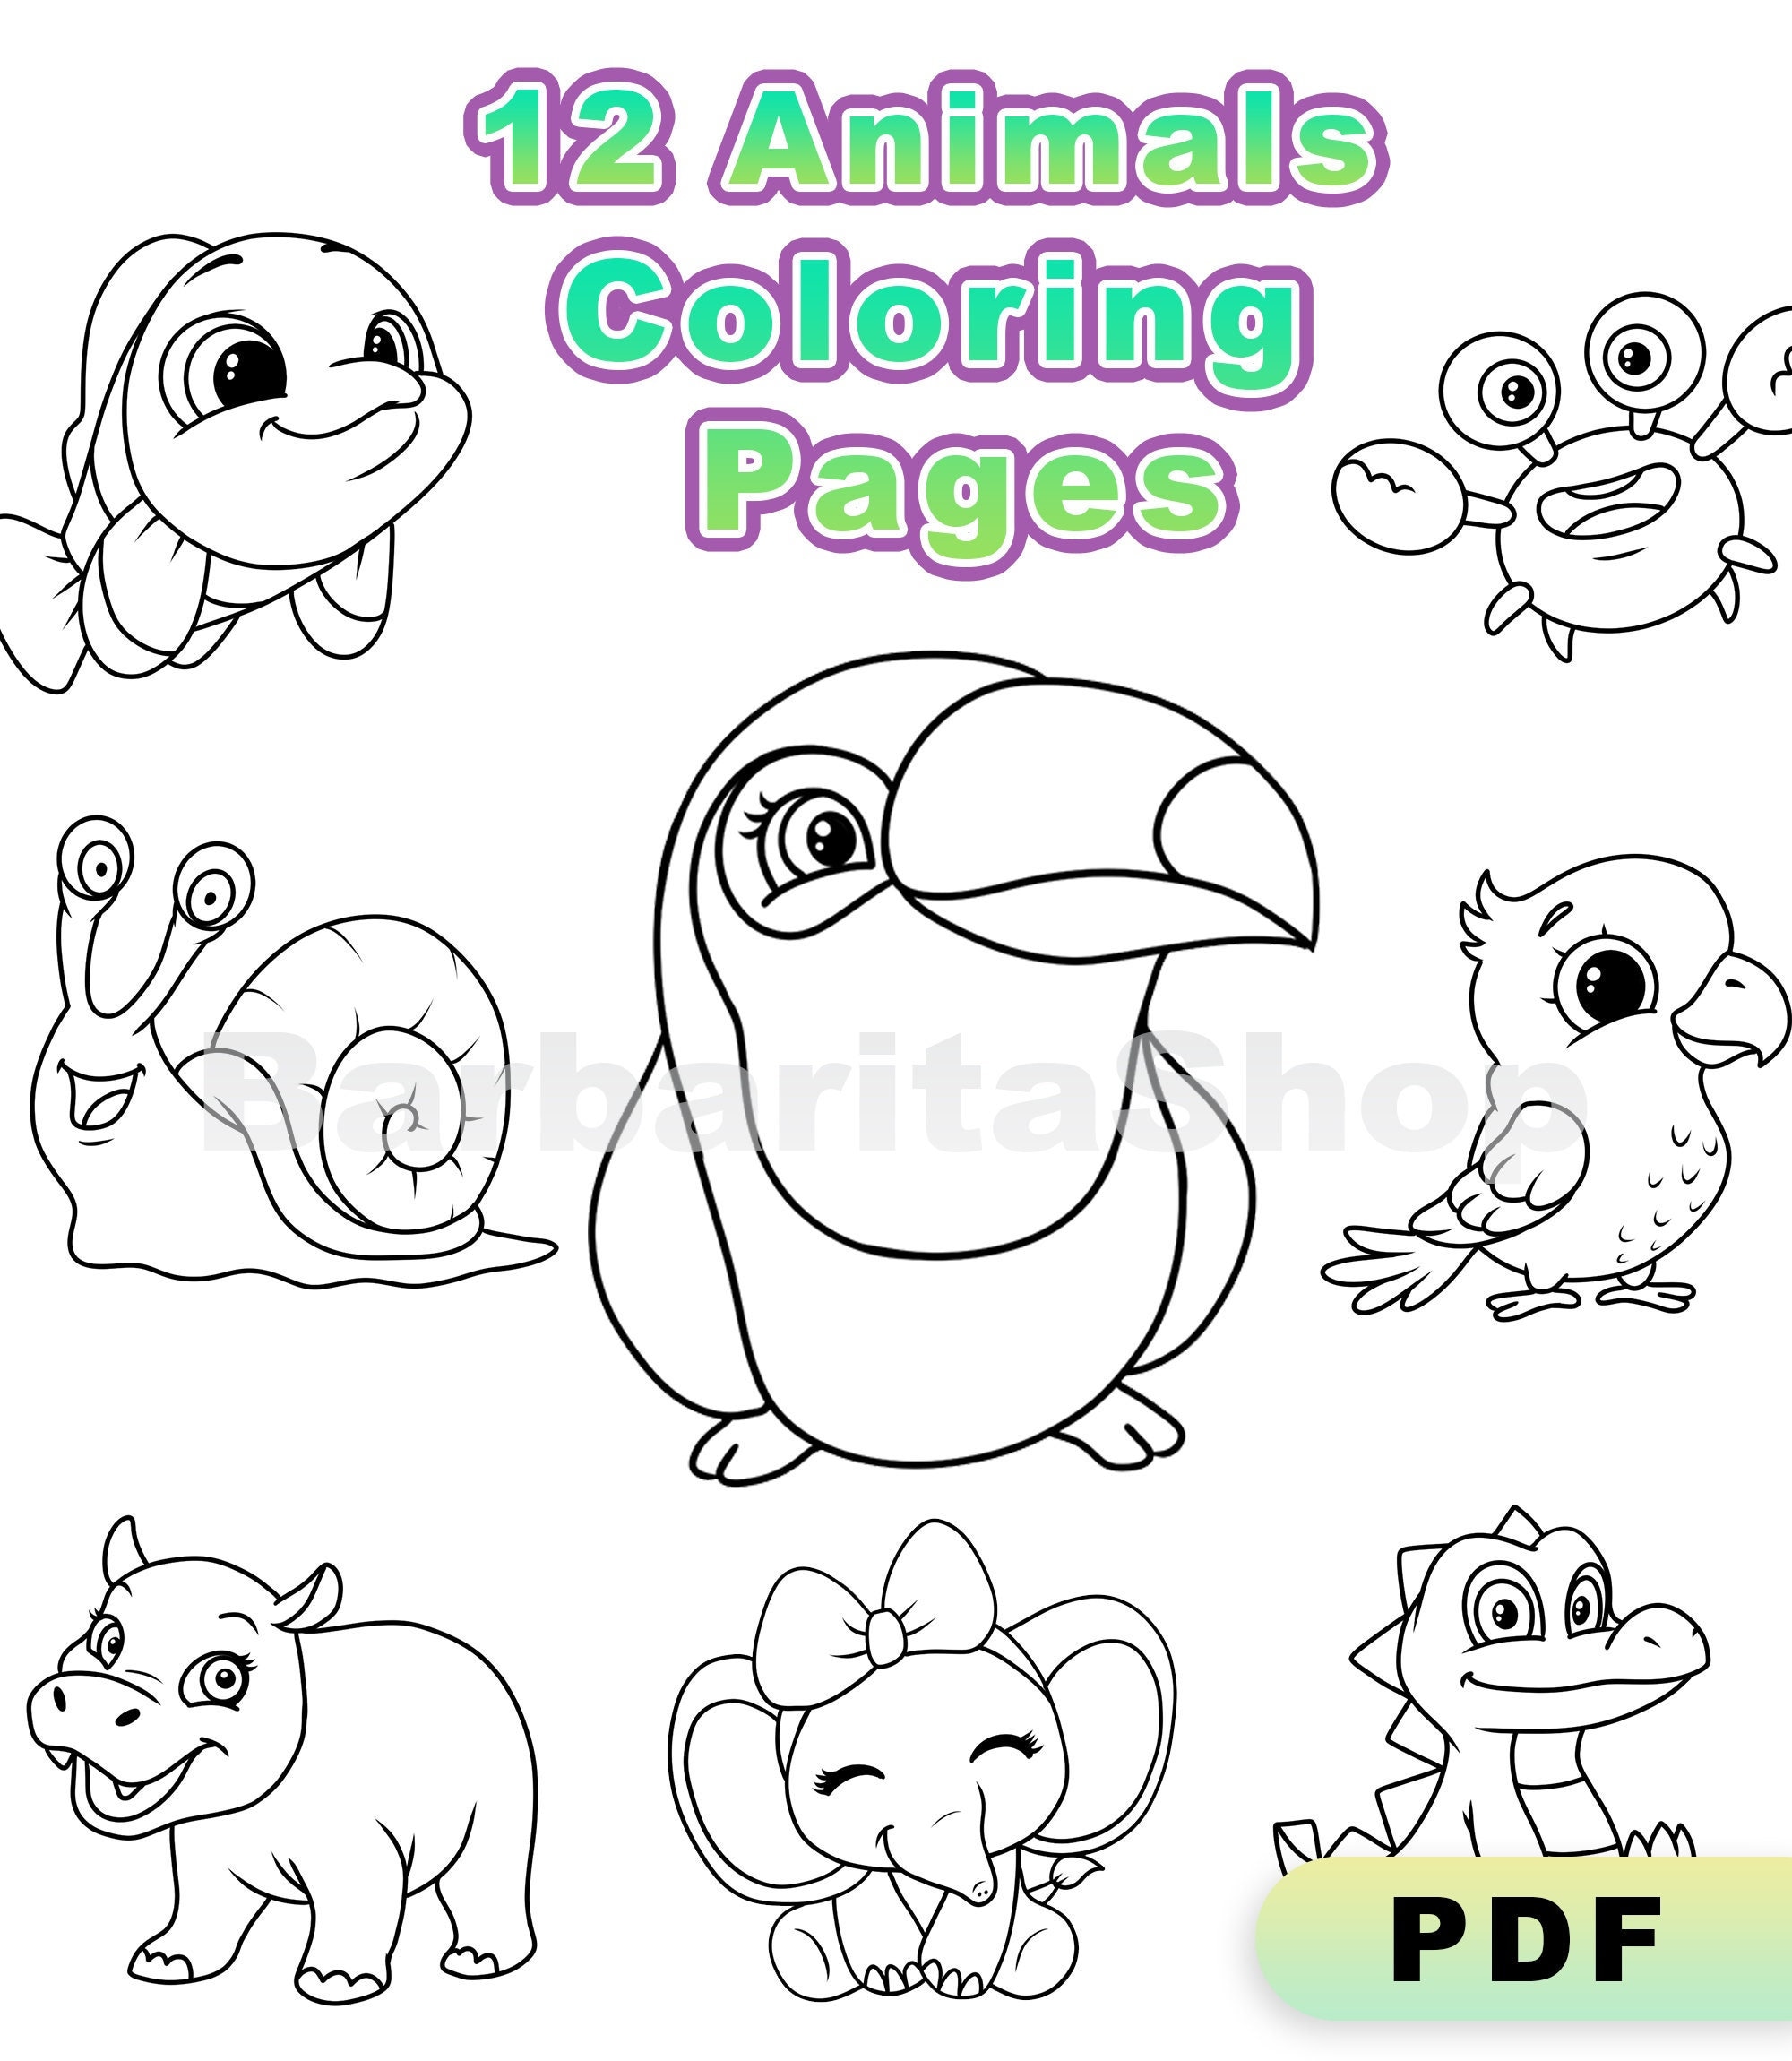 desenho para pintar com tinta guache - Pesquisa Google  Kids coloring  books, Turtle coloring pages, Animal coloring pages